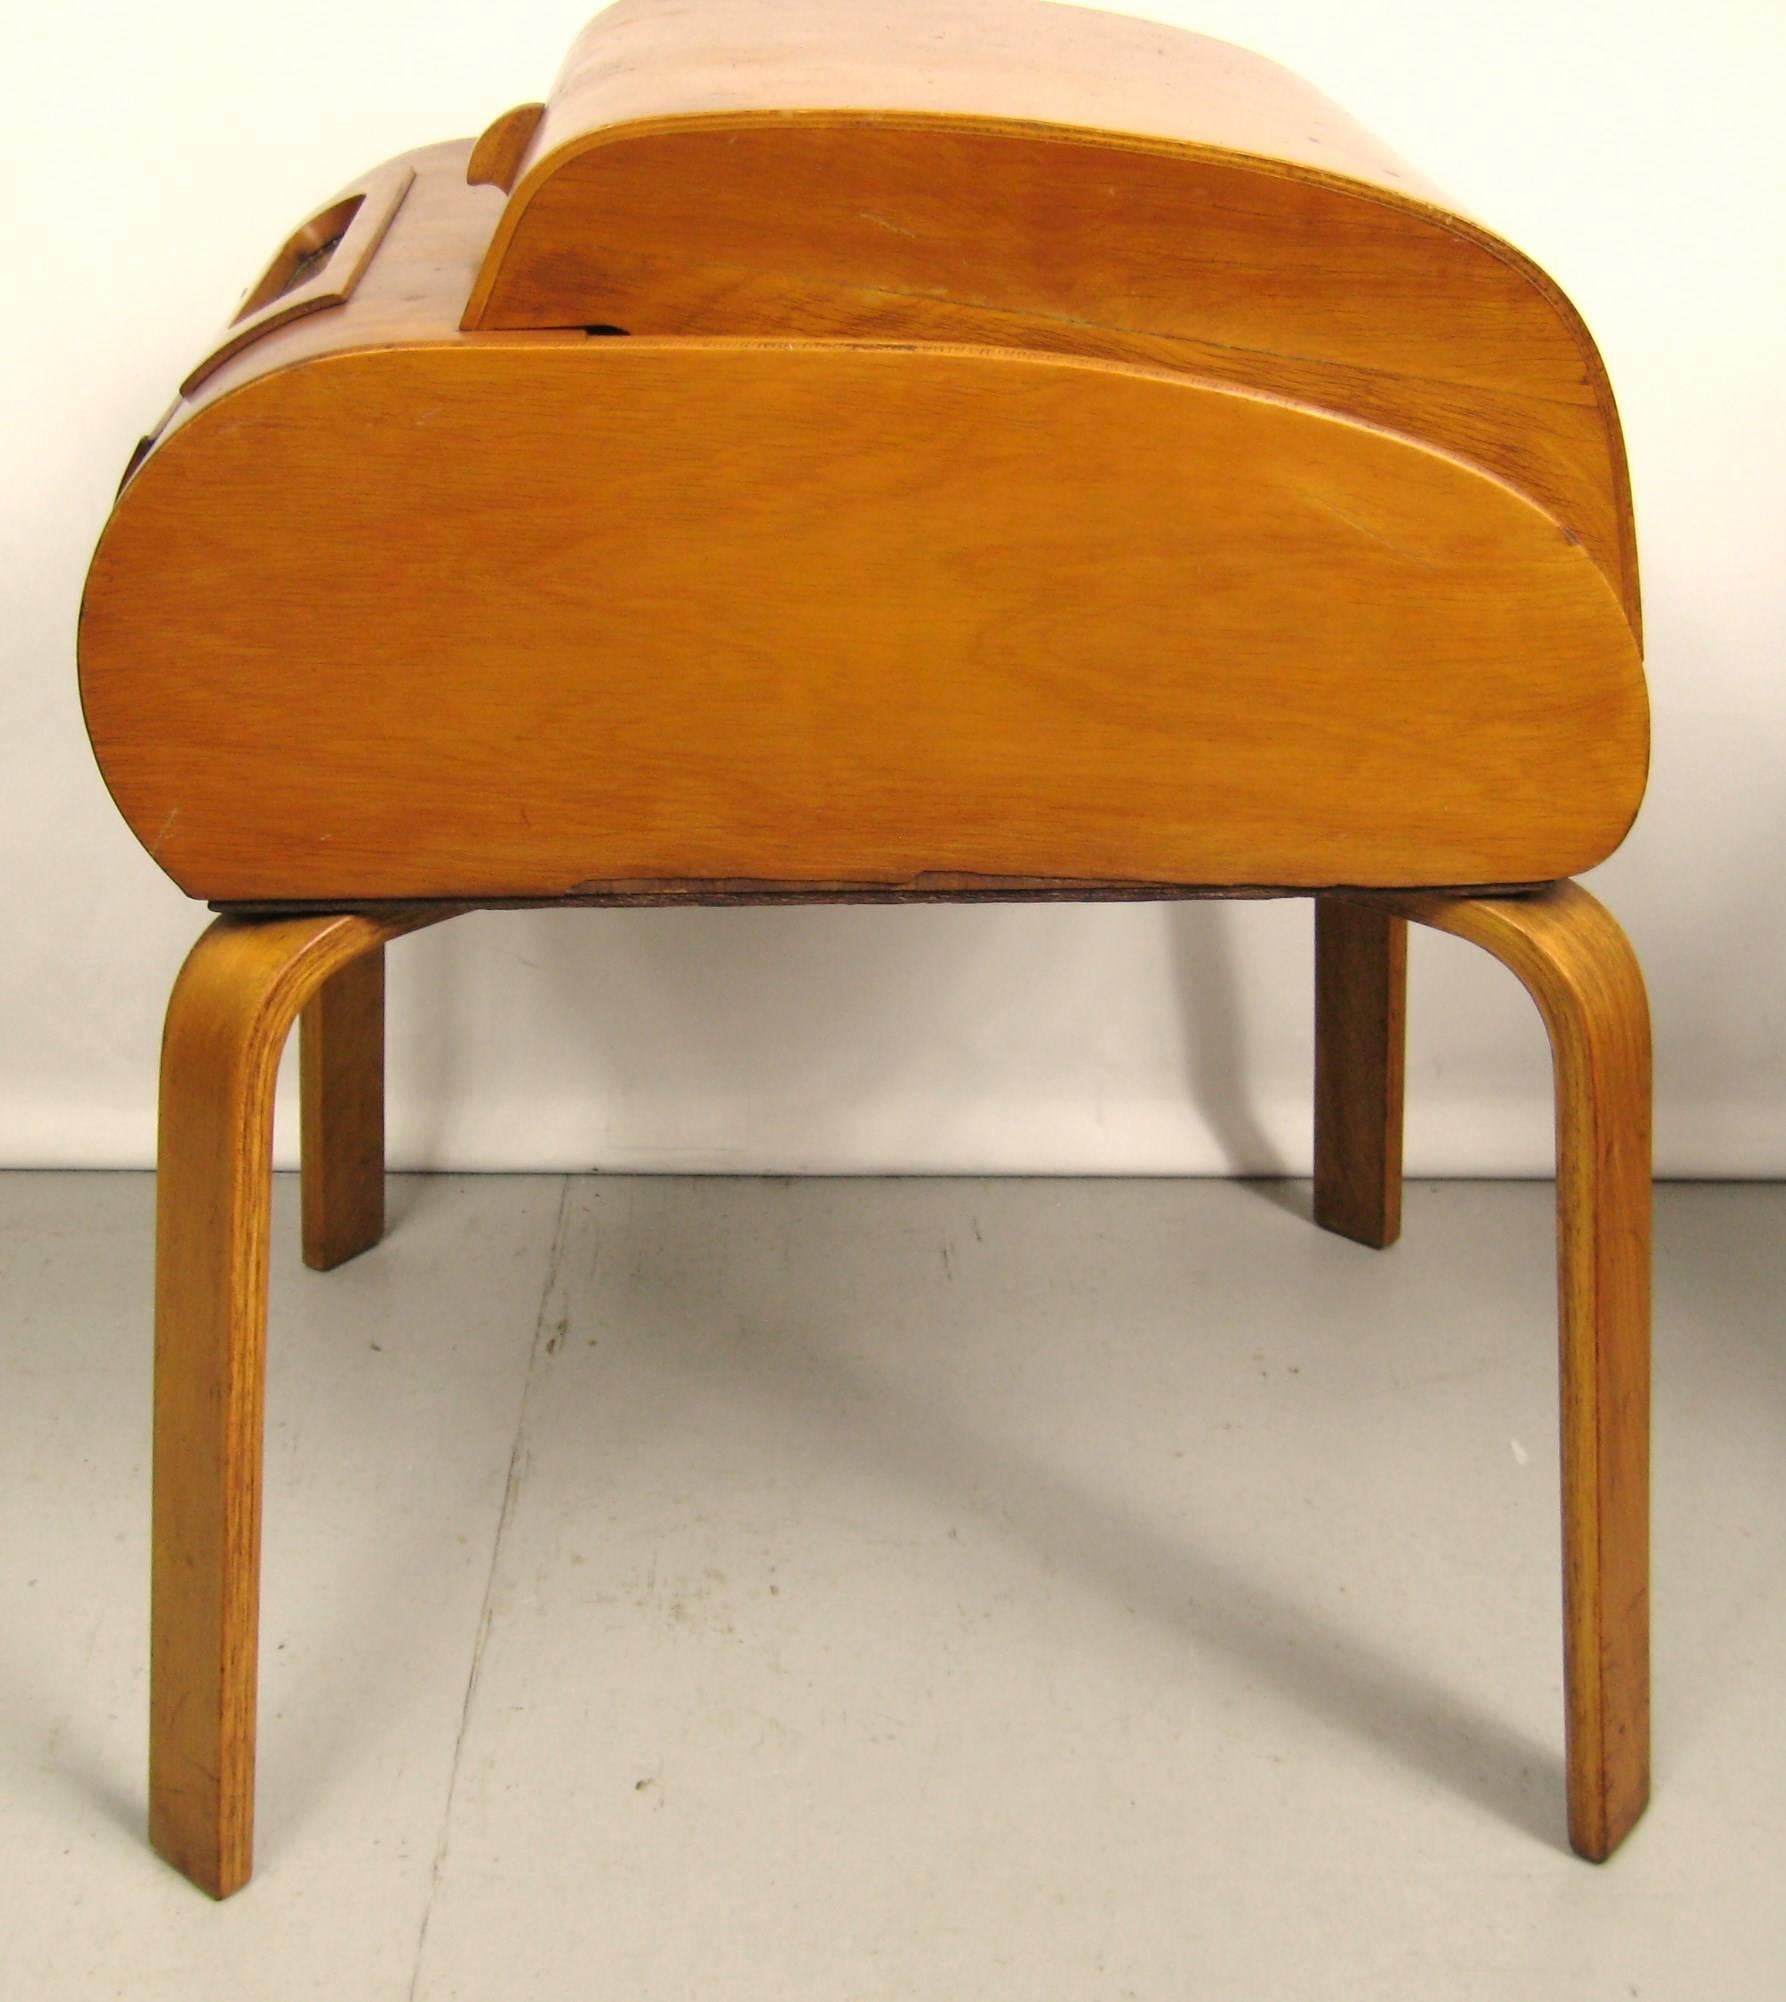 American Bent Plywood 1940s Radio Bsr Phonograph in the Matter of Alvar Aalto